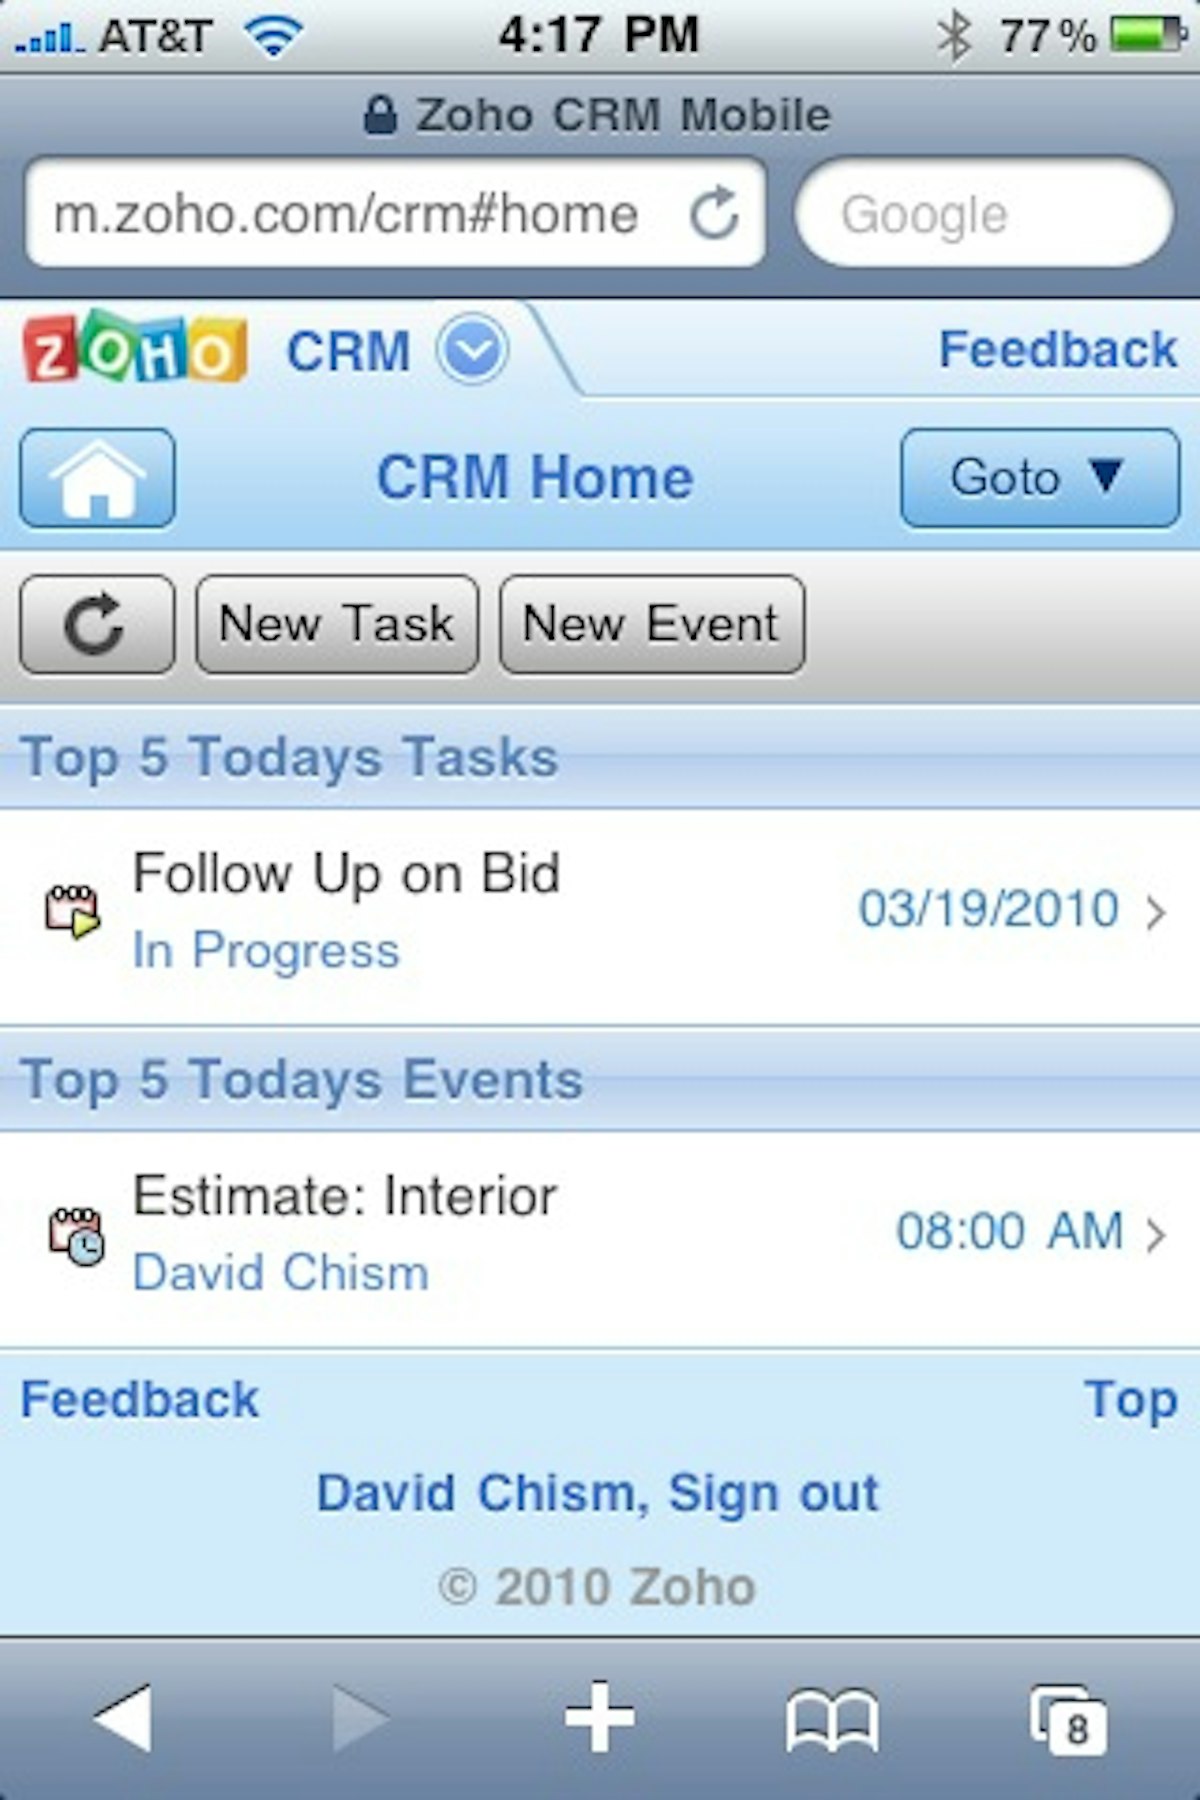  A Review of Zoho CRM for iPhone & Desktop